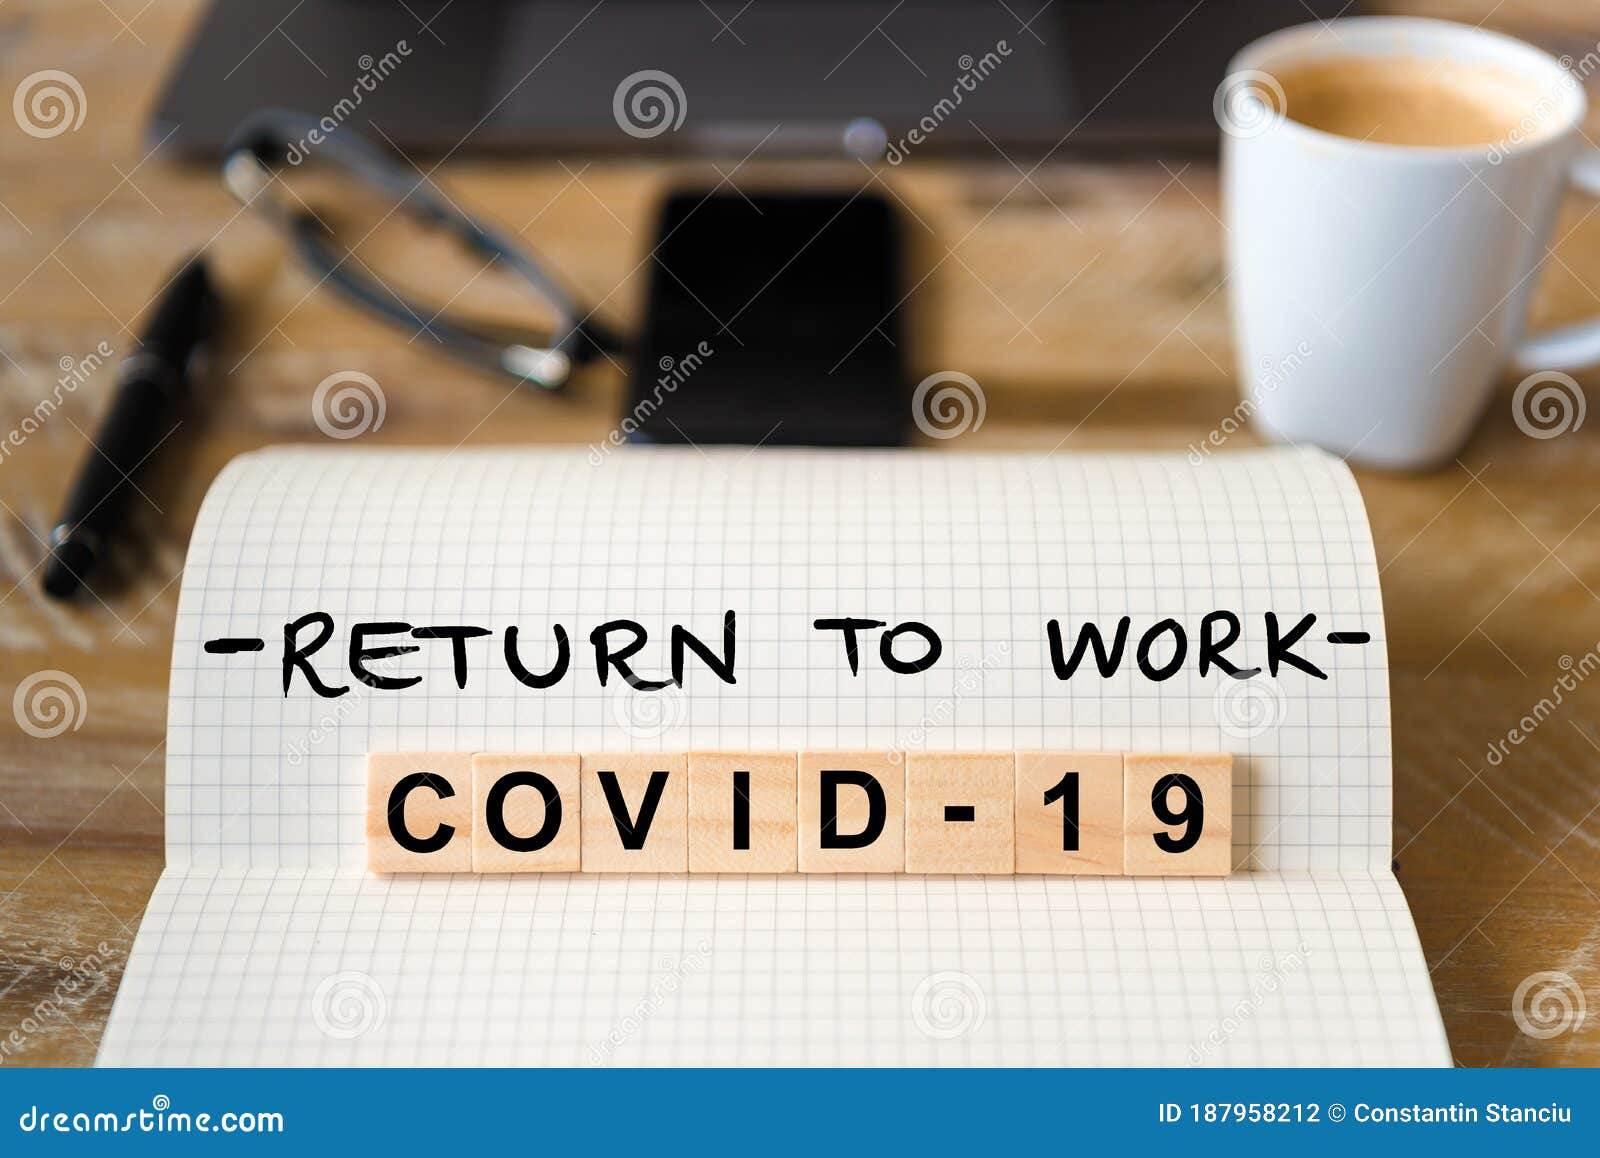 closeup on notebook over wood table background, focus on wooden blocks with letters making covid-19 return to work writing